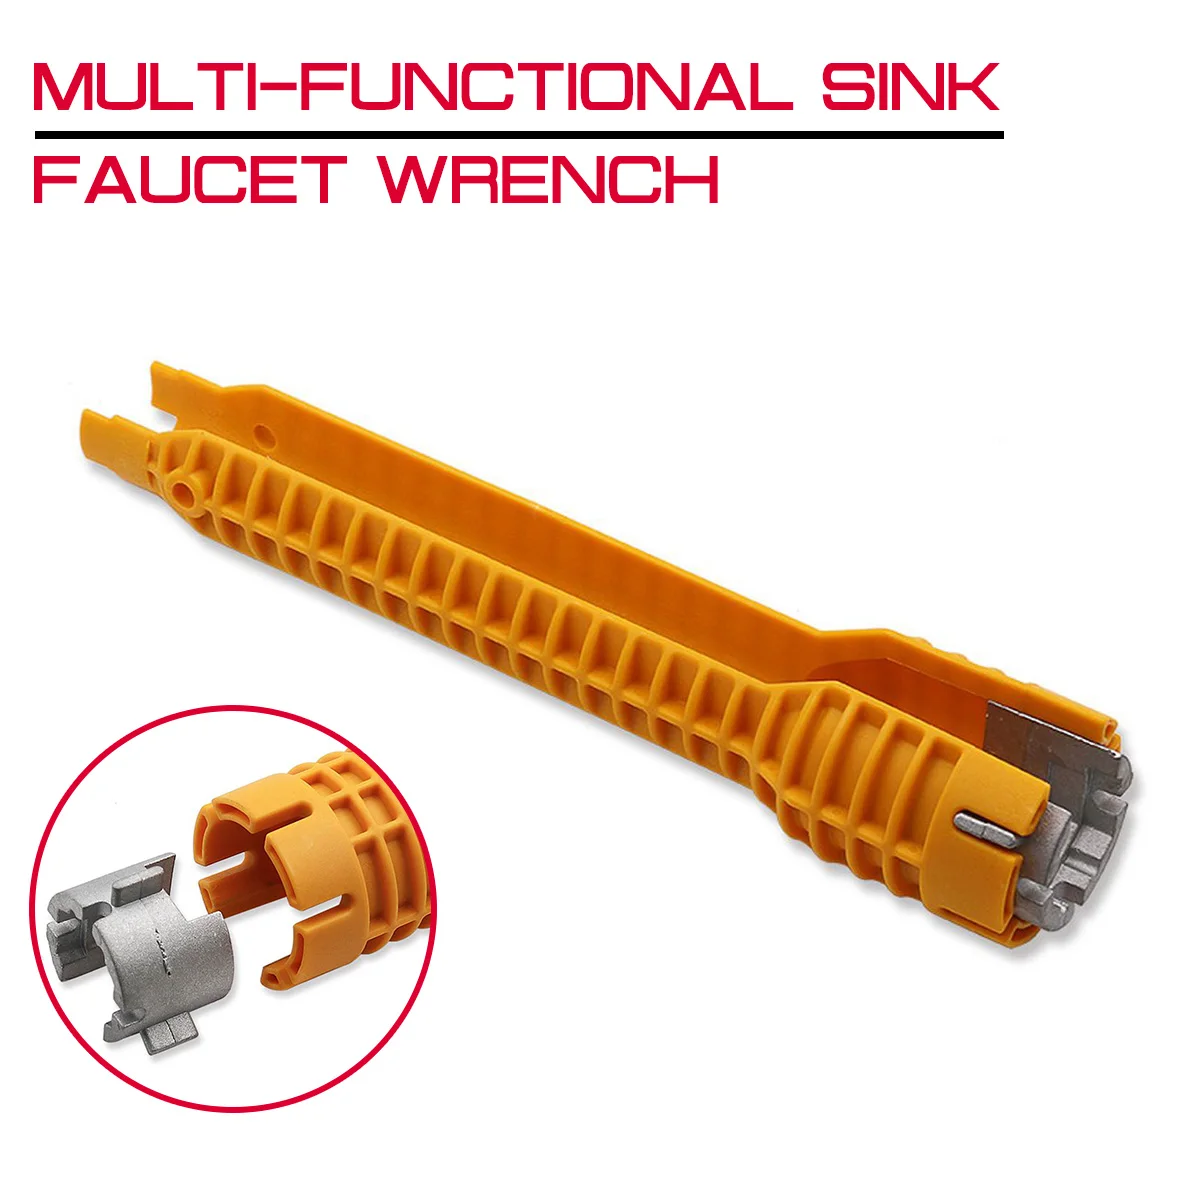 

Household Bath Kitchen Multifunction Install Tap Spanner Sink Basin Faucet Wrench Sink Installer Tools